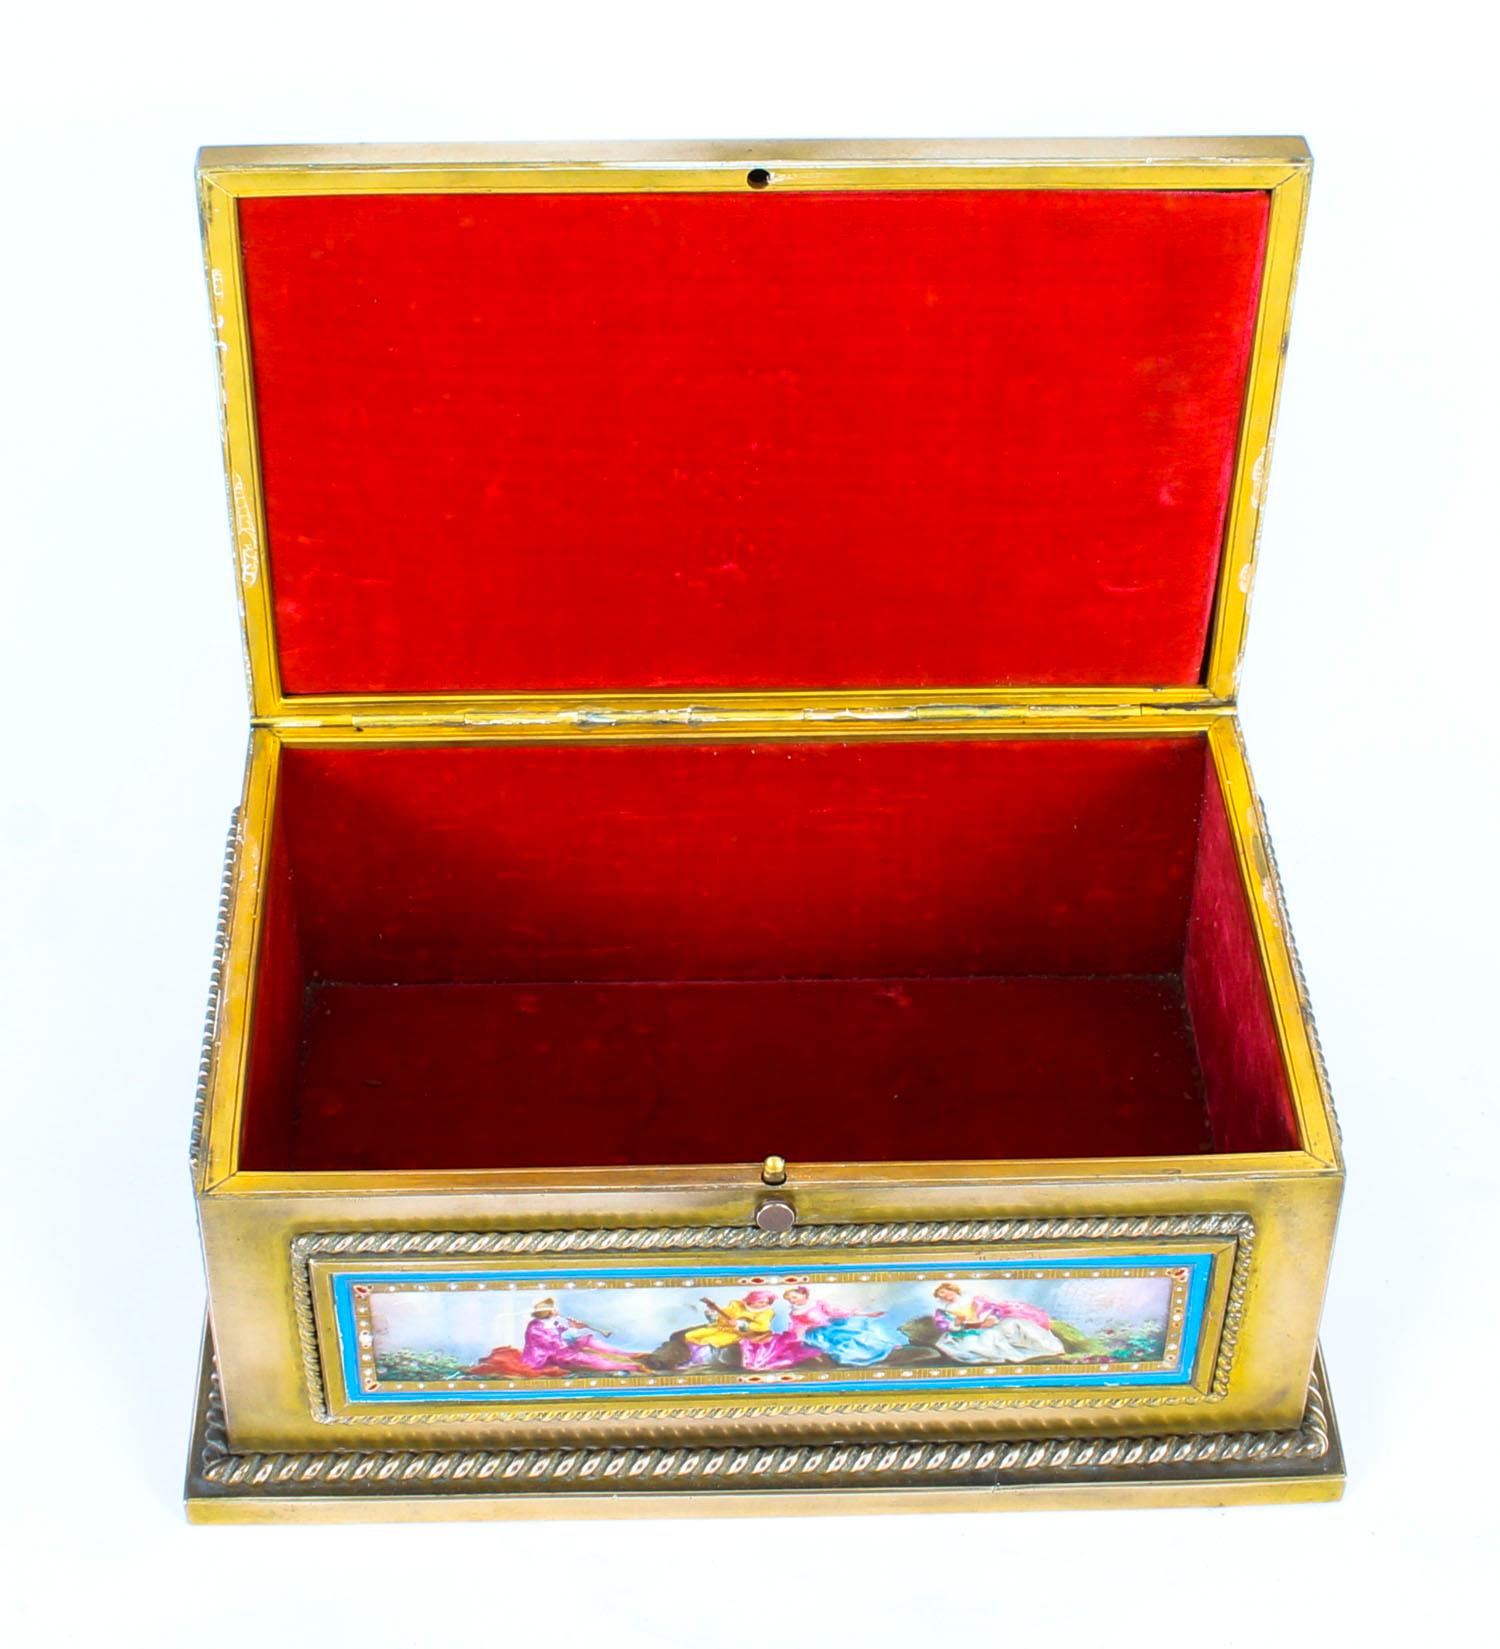 This is a fabulous antique French Ormolu jewelry casket with inset Sèvres Porcelain panels, circa 1880 in date.

This magnificent casket is rectangular in shape with a decorative inset Sèvres Porcelain panel on top and on each side. These panels